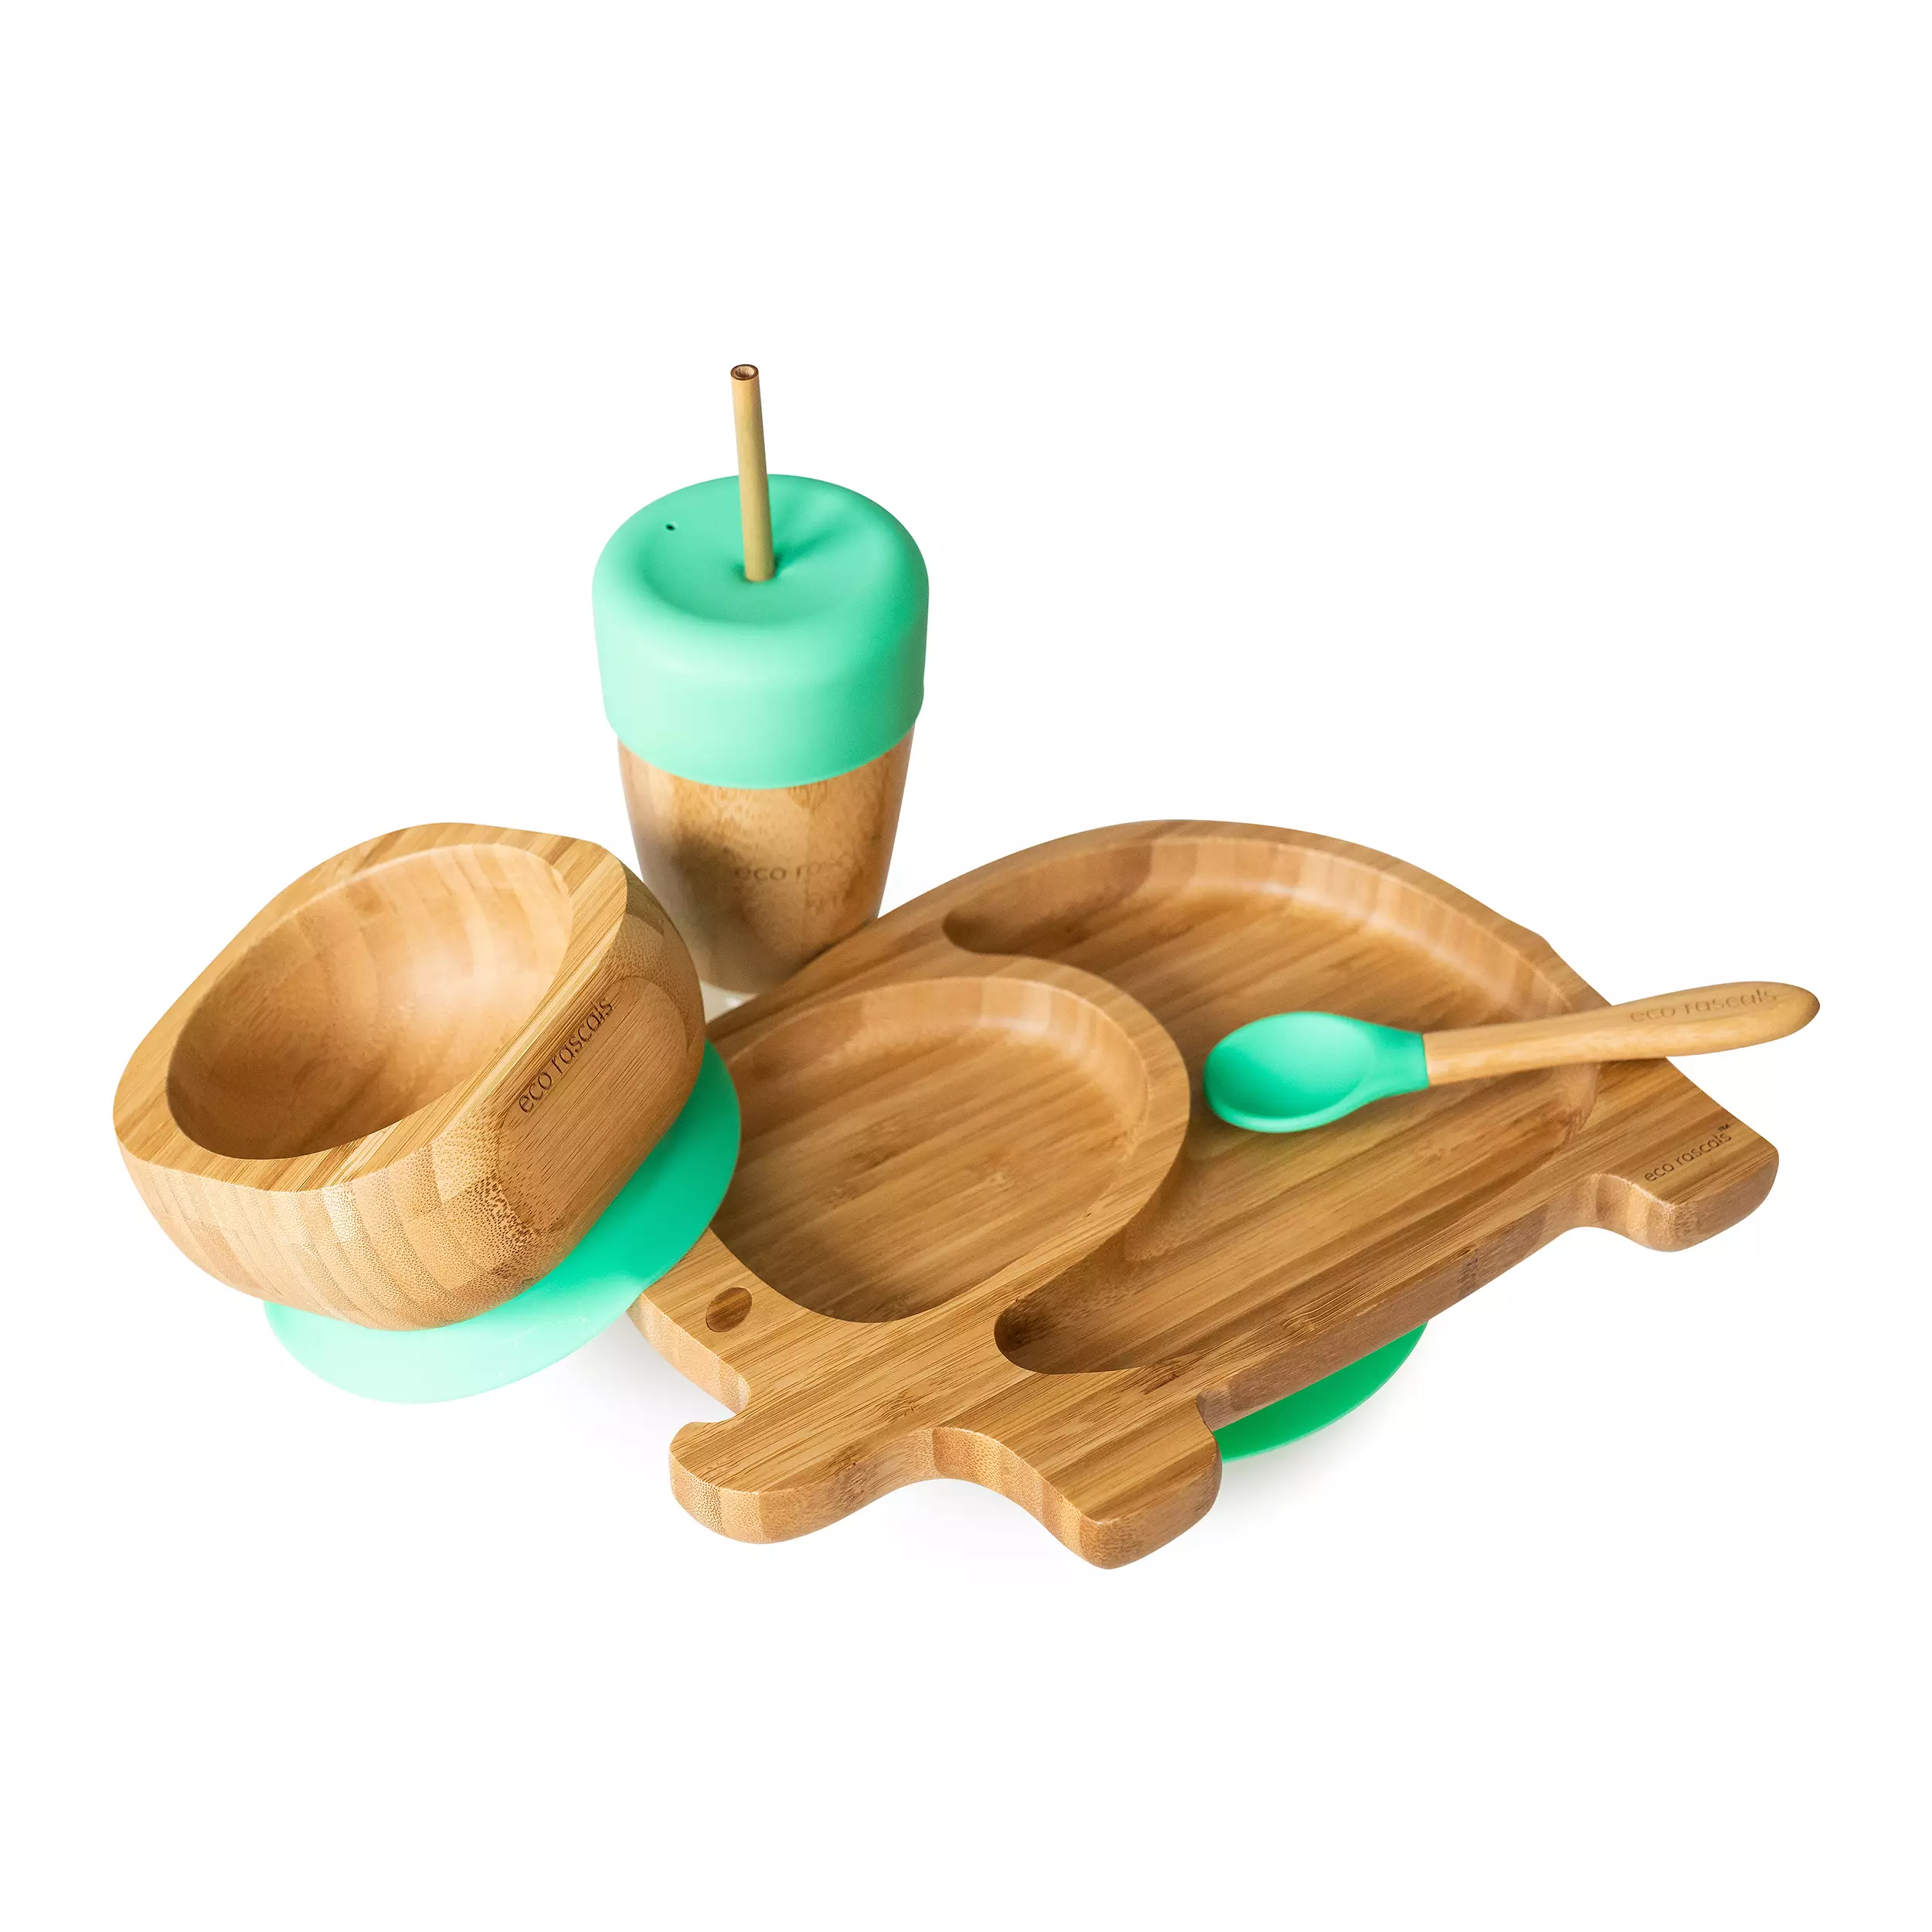 Bamboo Elephant Plate Weaning Gift Set - Green